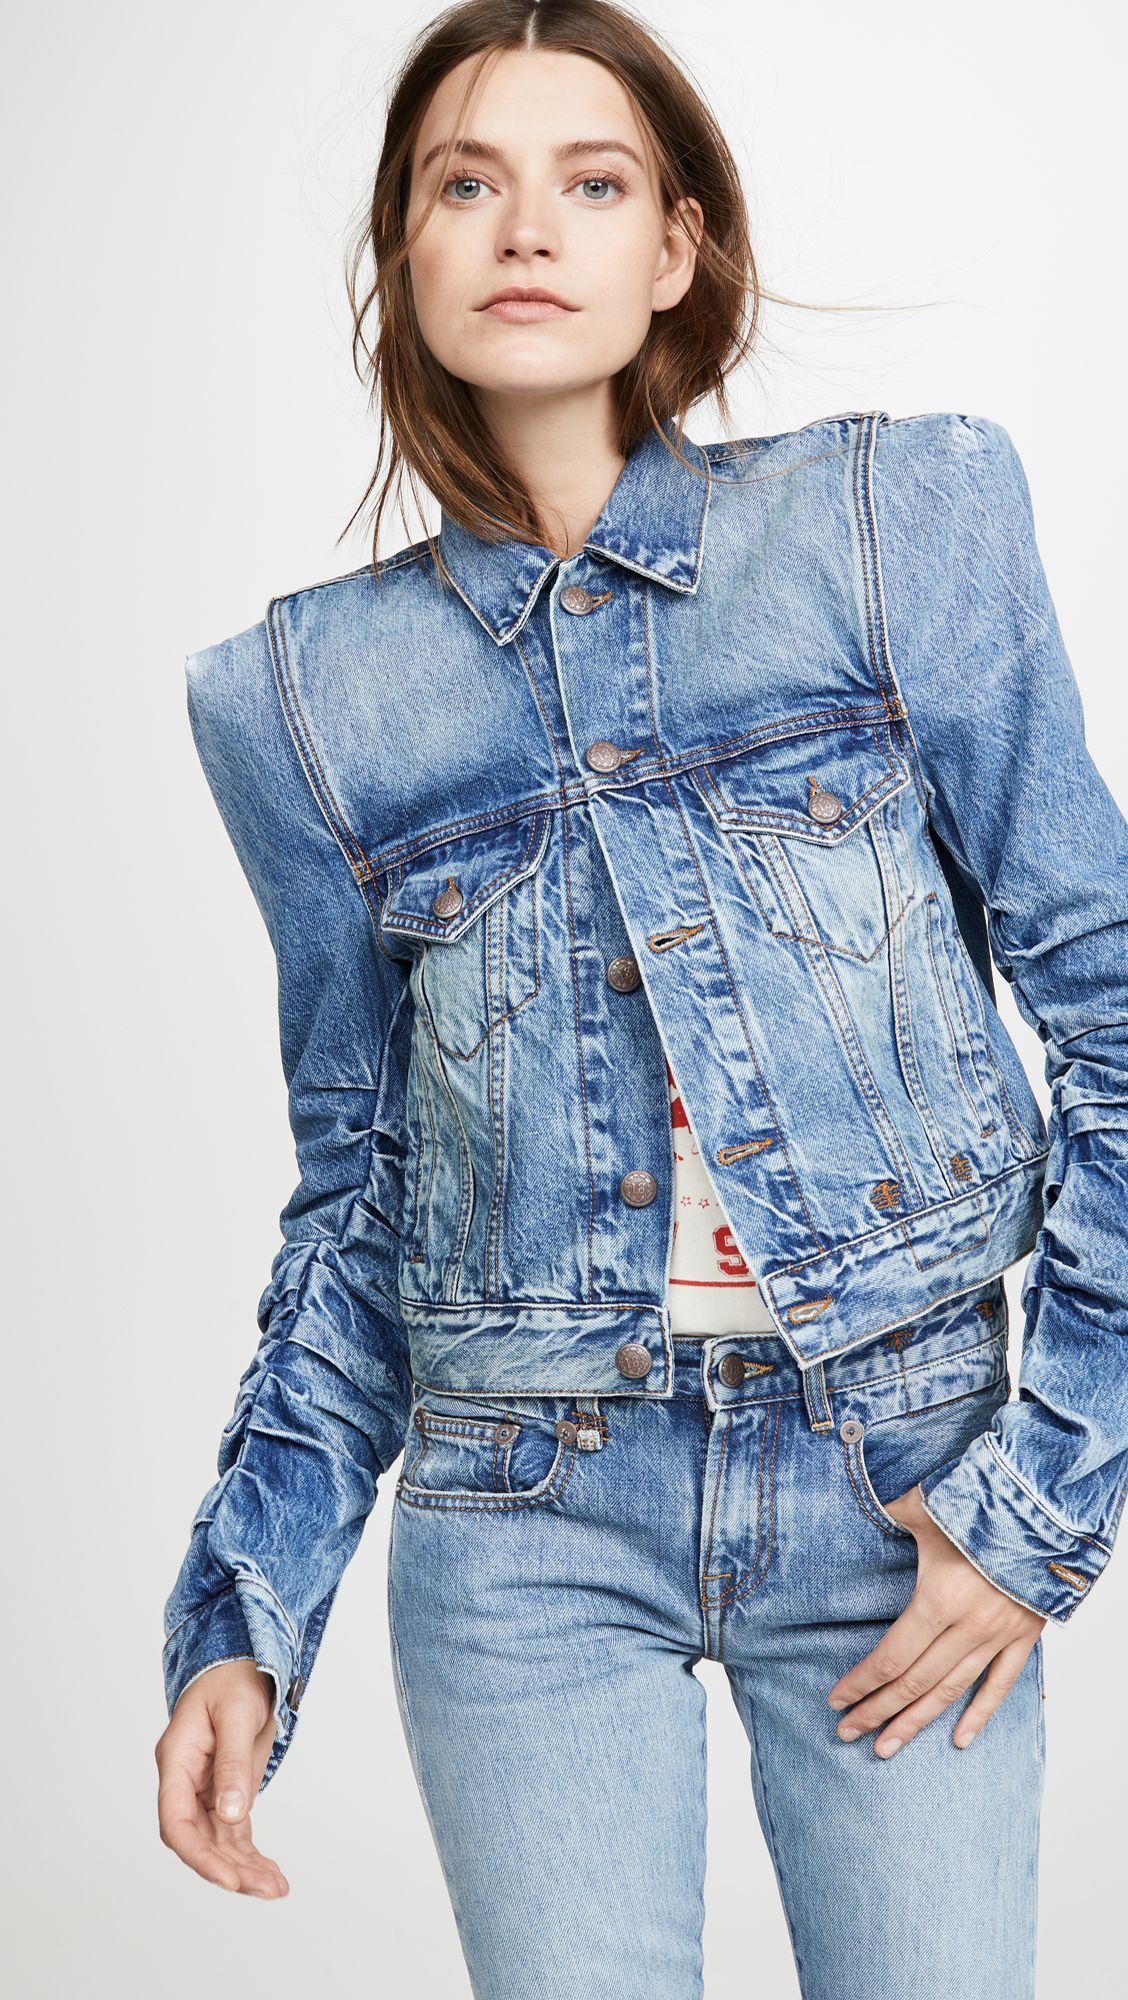 jean jacket outfits womens